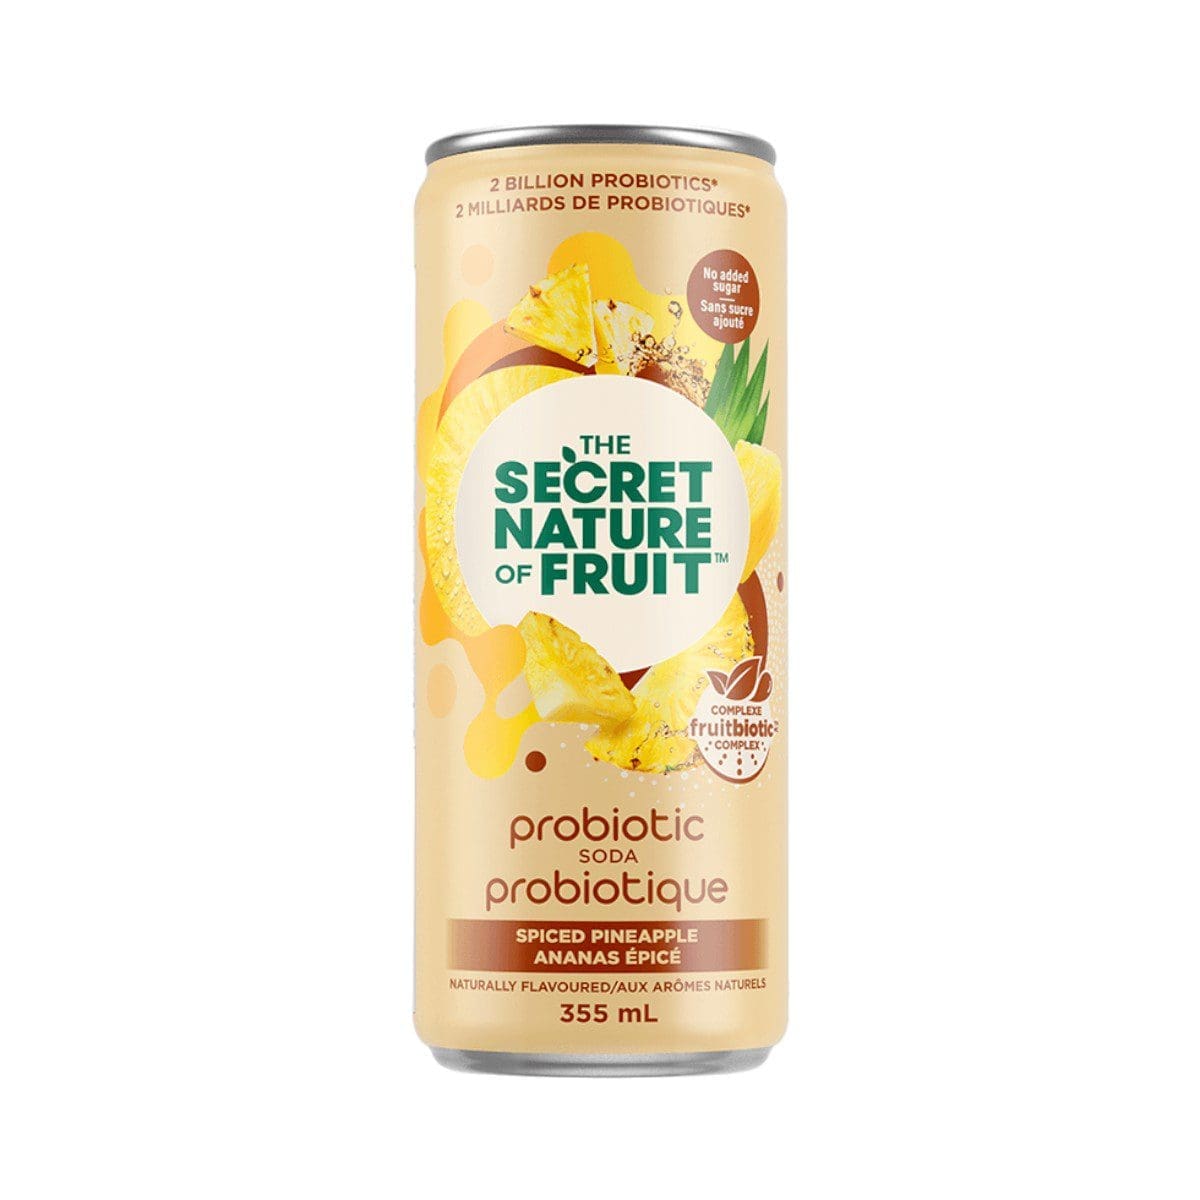 The Secret Nature of Fruit Spiced Pineapple